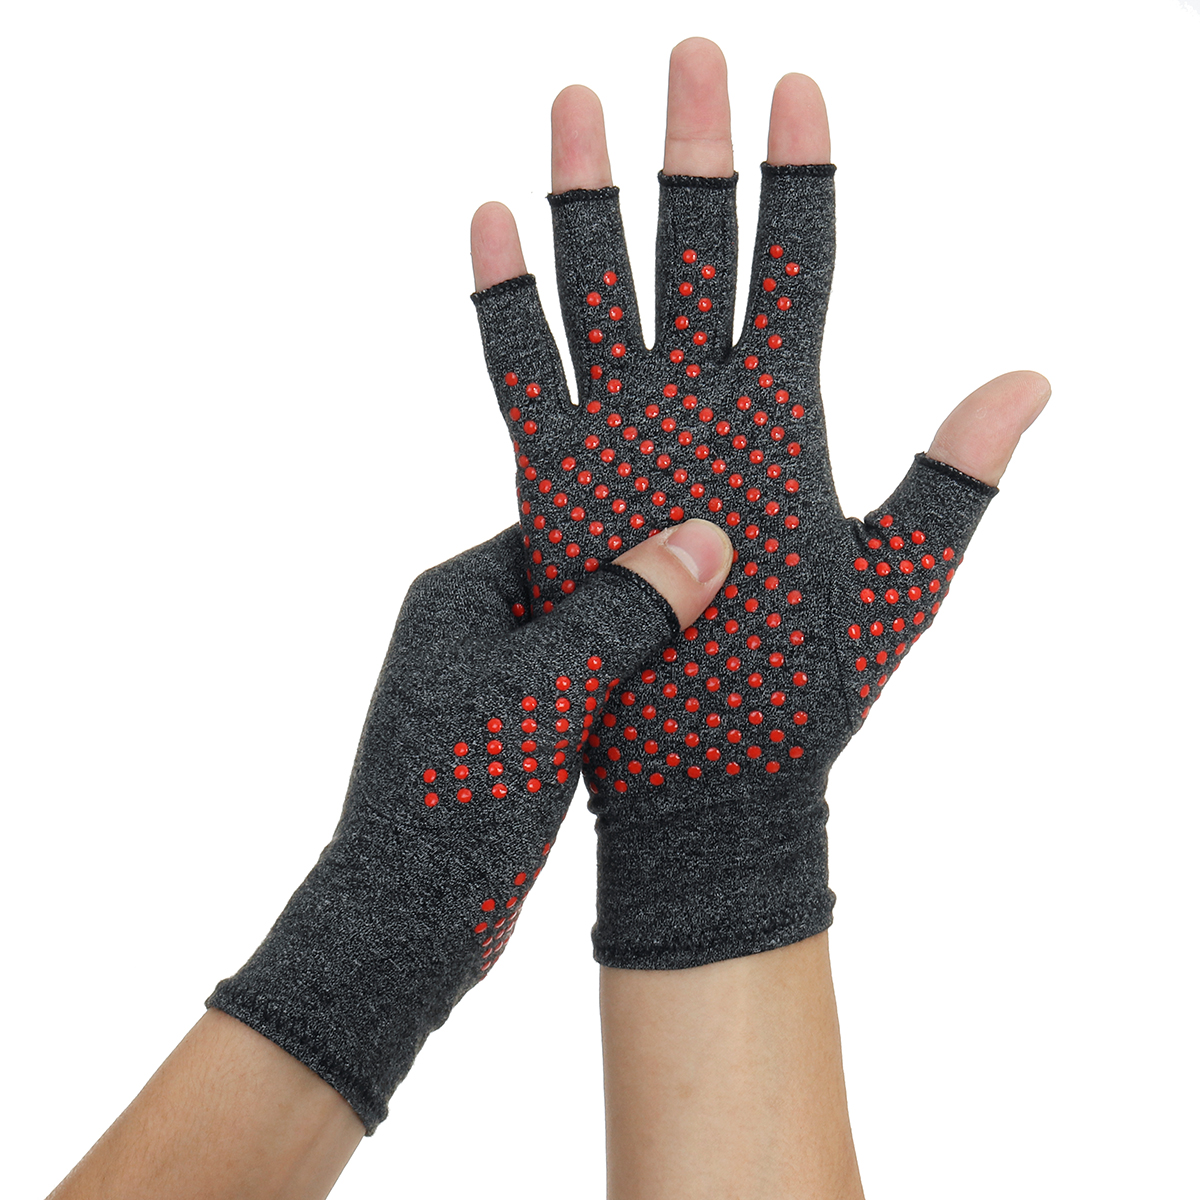 1-Pair-Compression-Arthritis-Gloves-Arthritic-Joint-Pain-Relief-Hand-Gloves-Therapy-Open-Fingers-Com-1777634-2